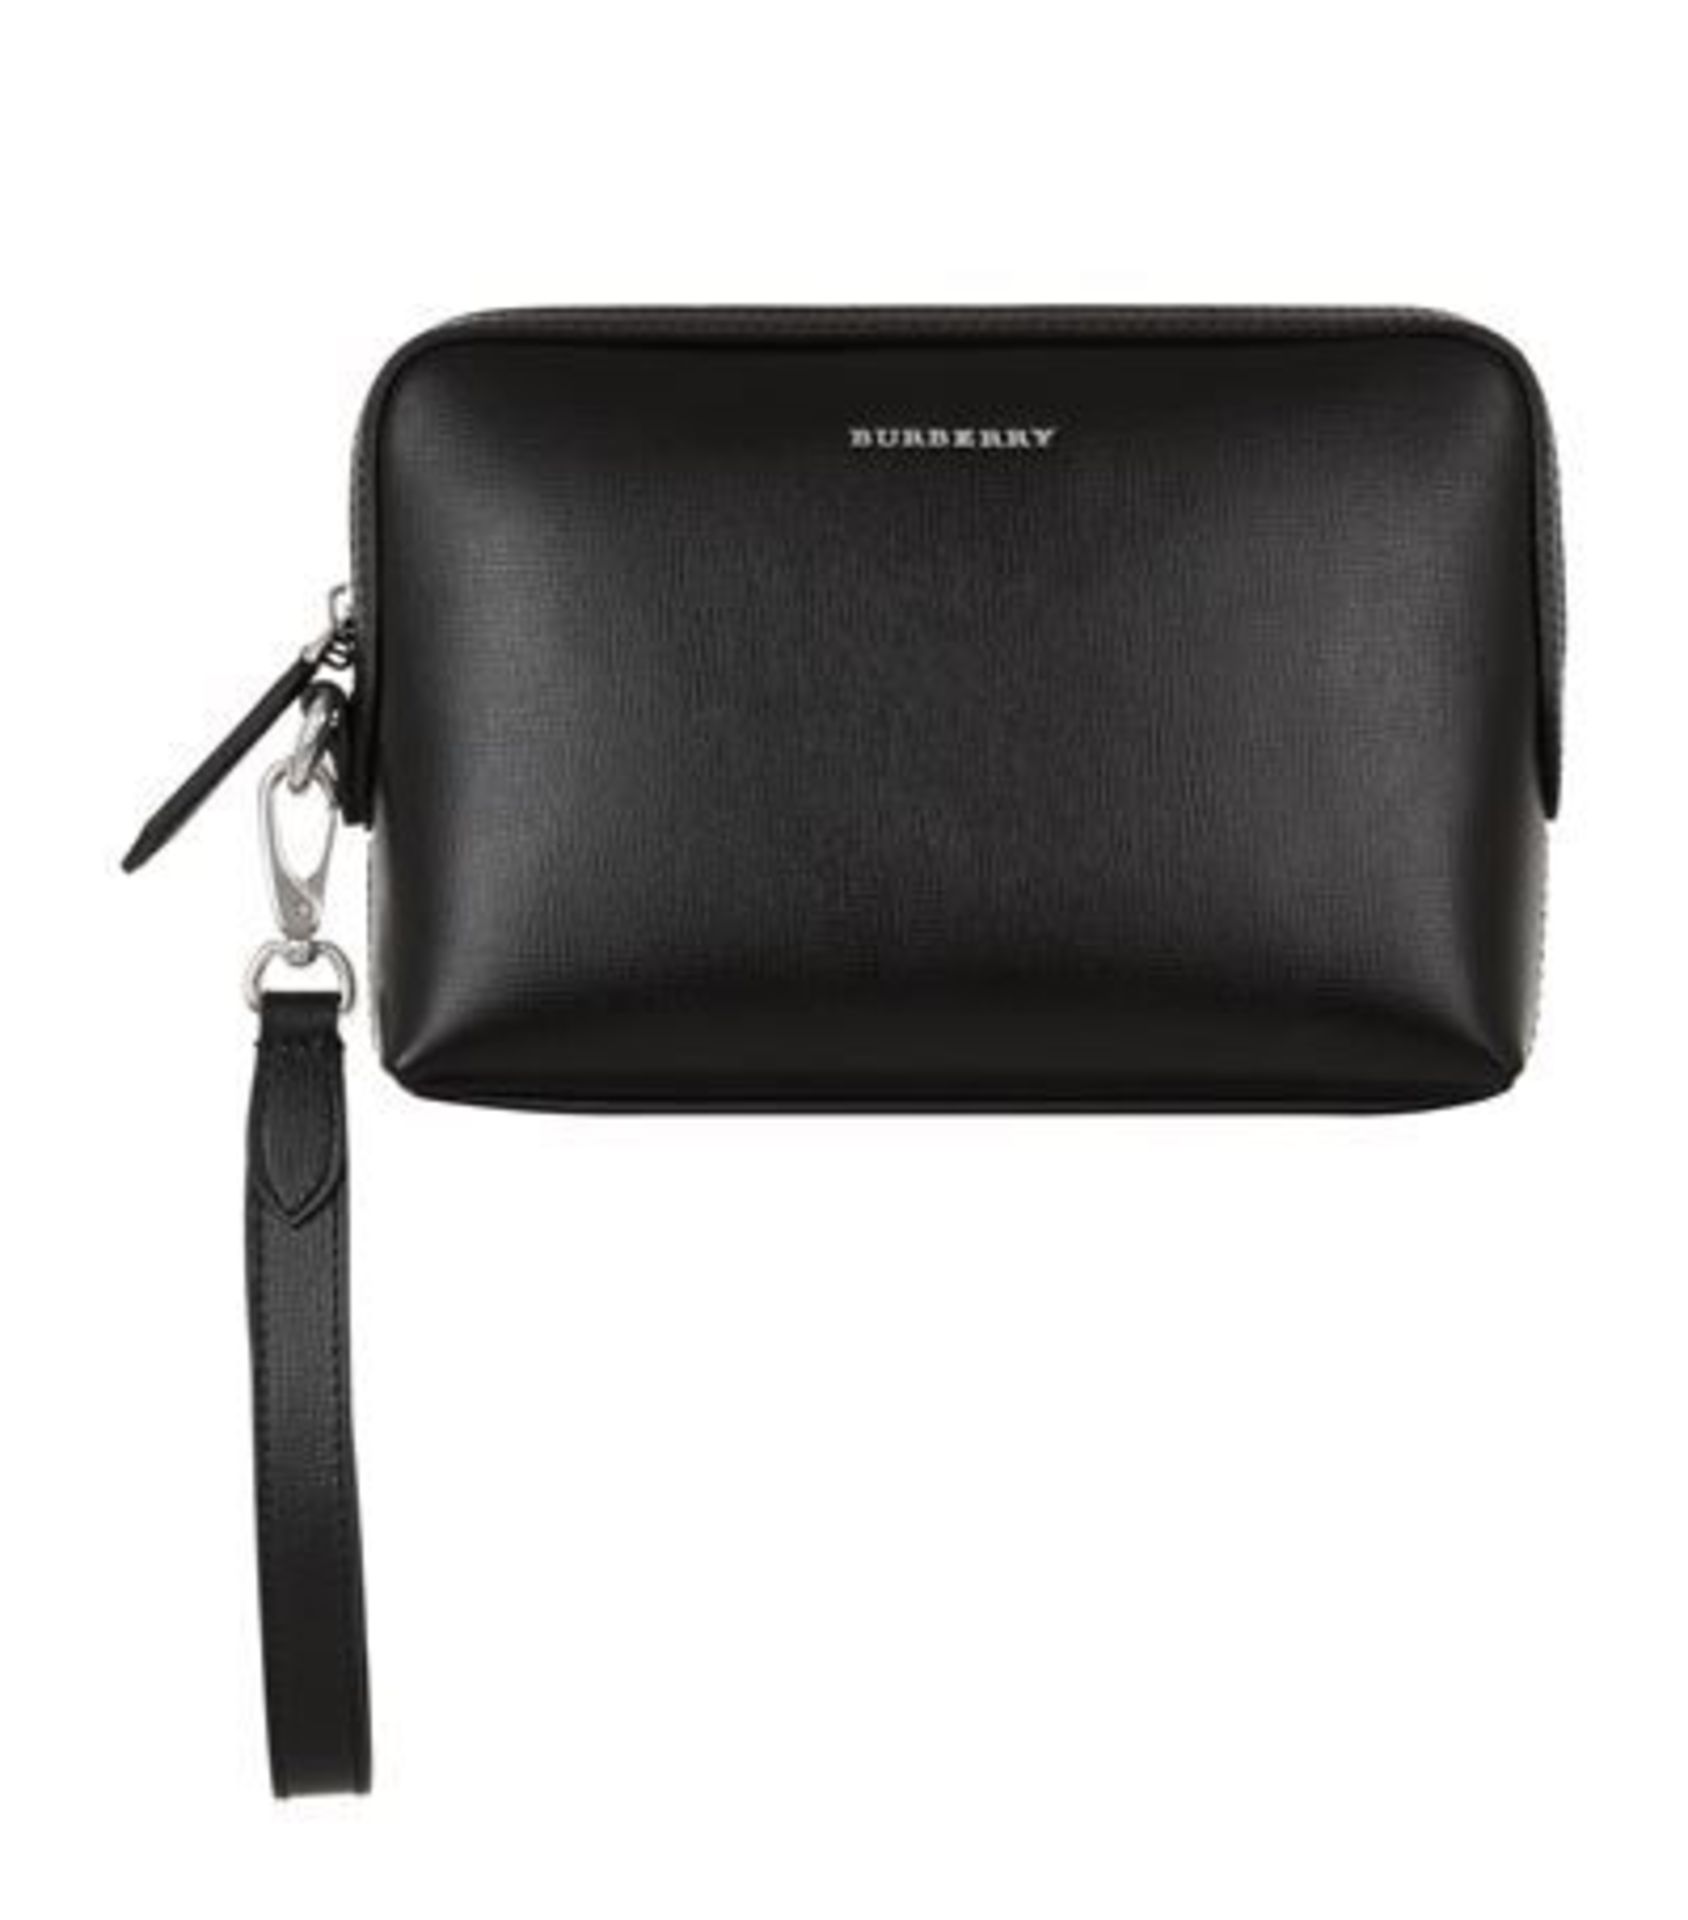 Genuine Burberry Saffiano Leather Clutch Bag In Black. RRP £885.00.